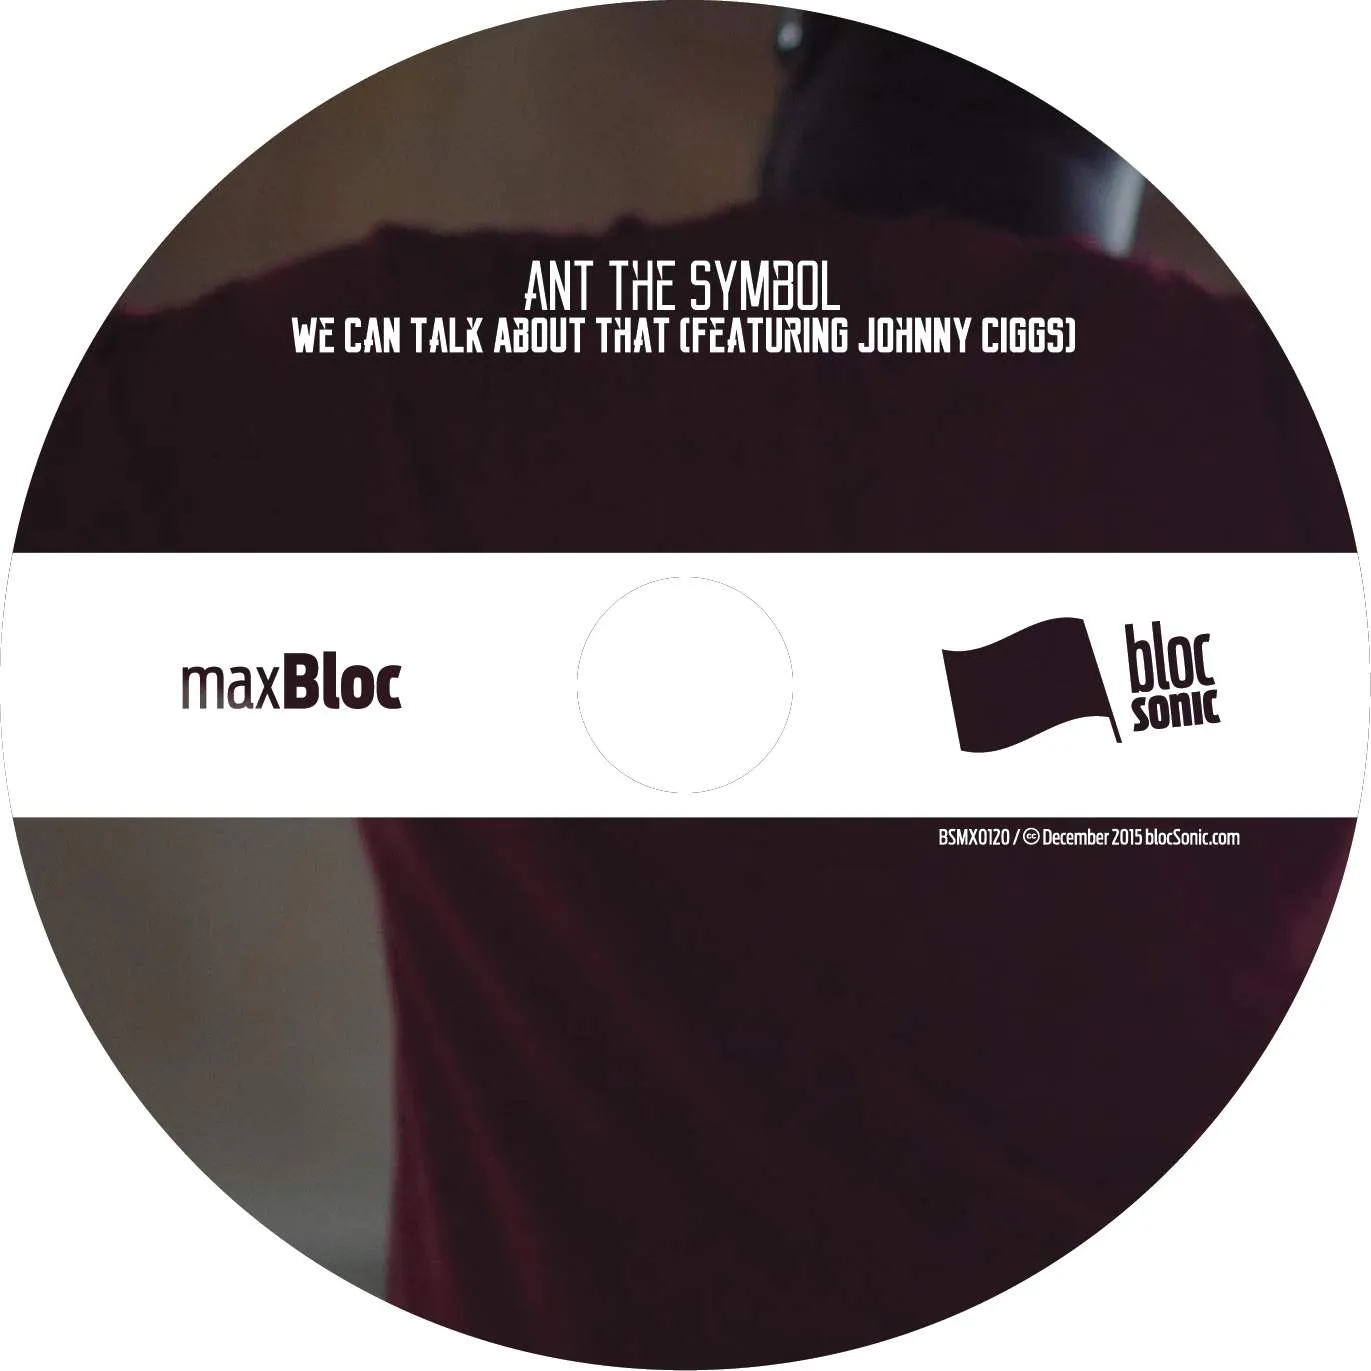 Album disc for “We Can Talk About That (Featuring Johnny Ciggs)” by Ant The Symbol